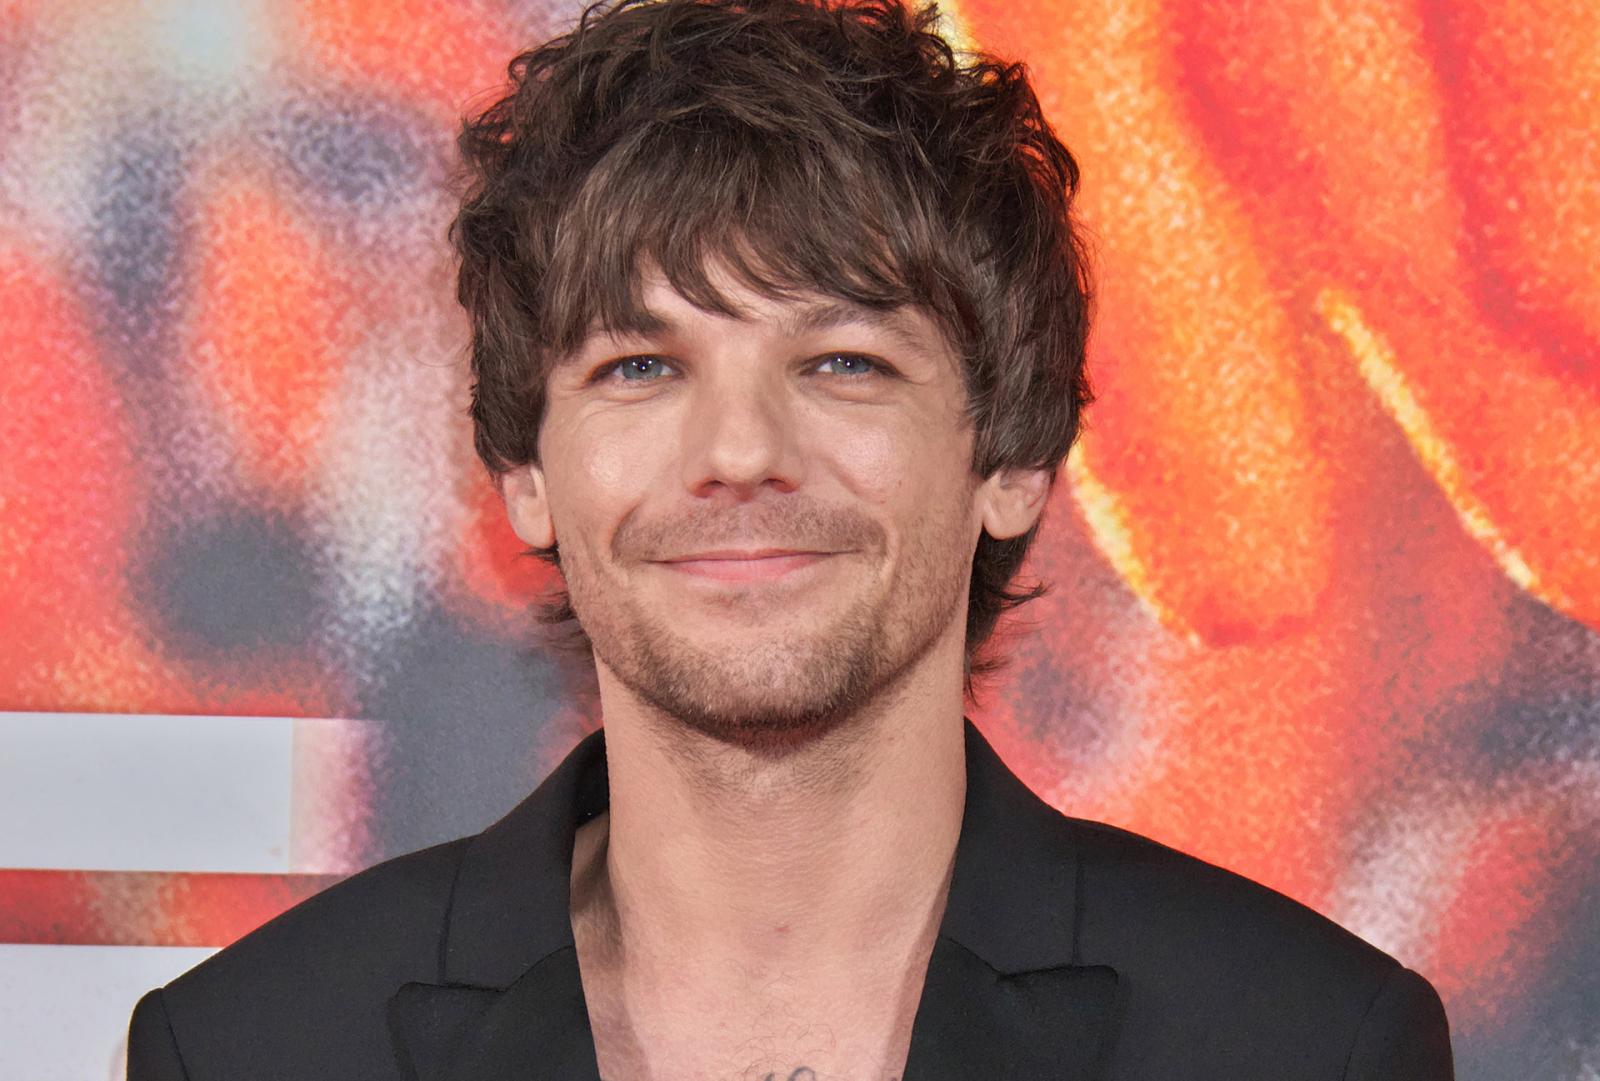 In 7 Years After One Direction Broke Up, One Member's Career Never Really Took Off - image 2